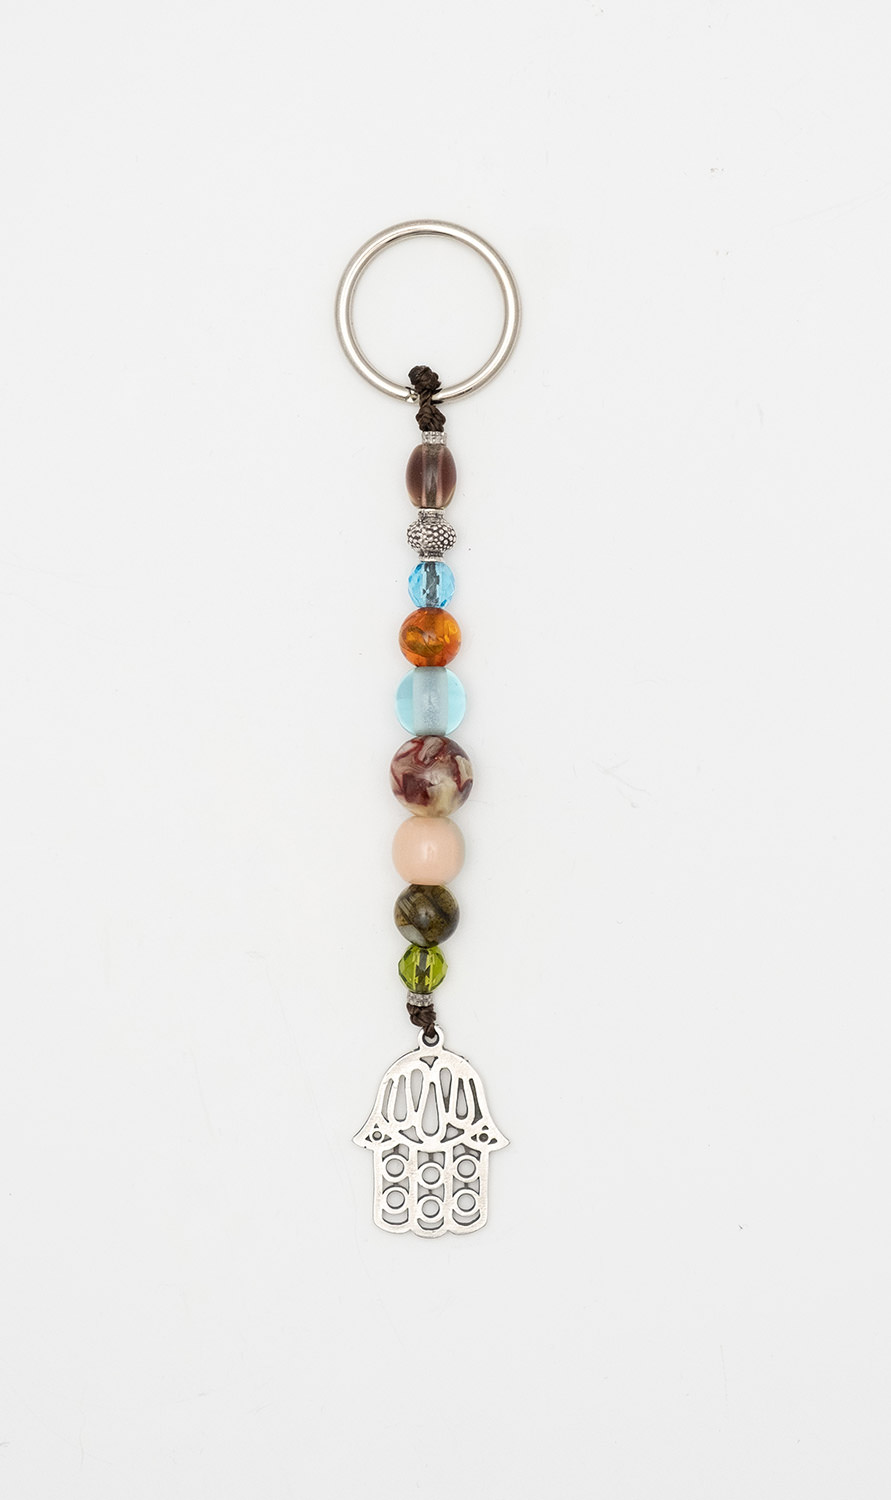 Keyring - amulet  made of artificial resin and crystal with Fatima hand